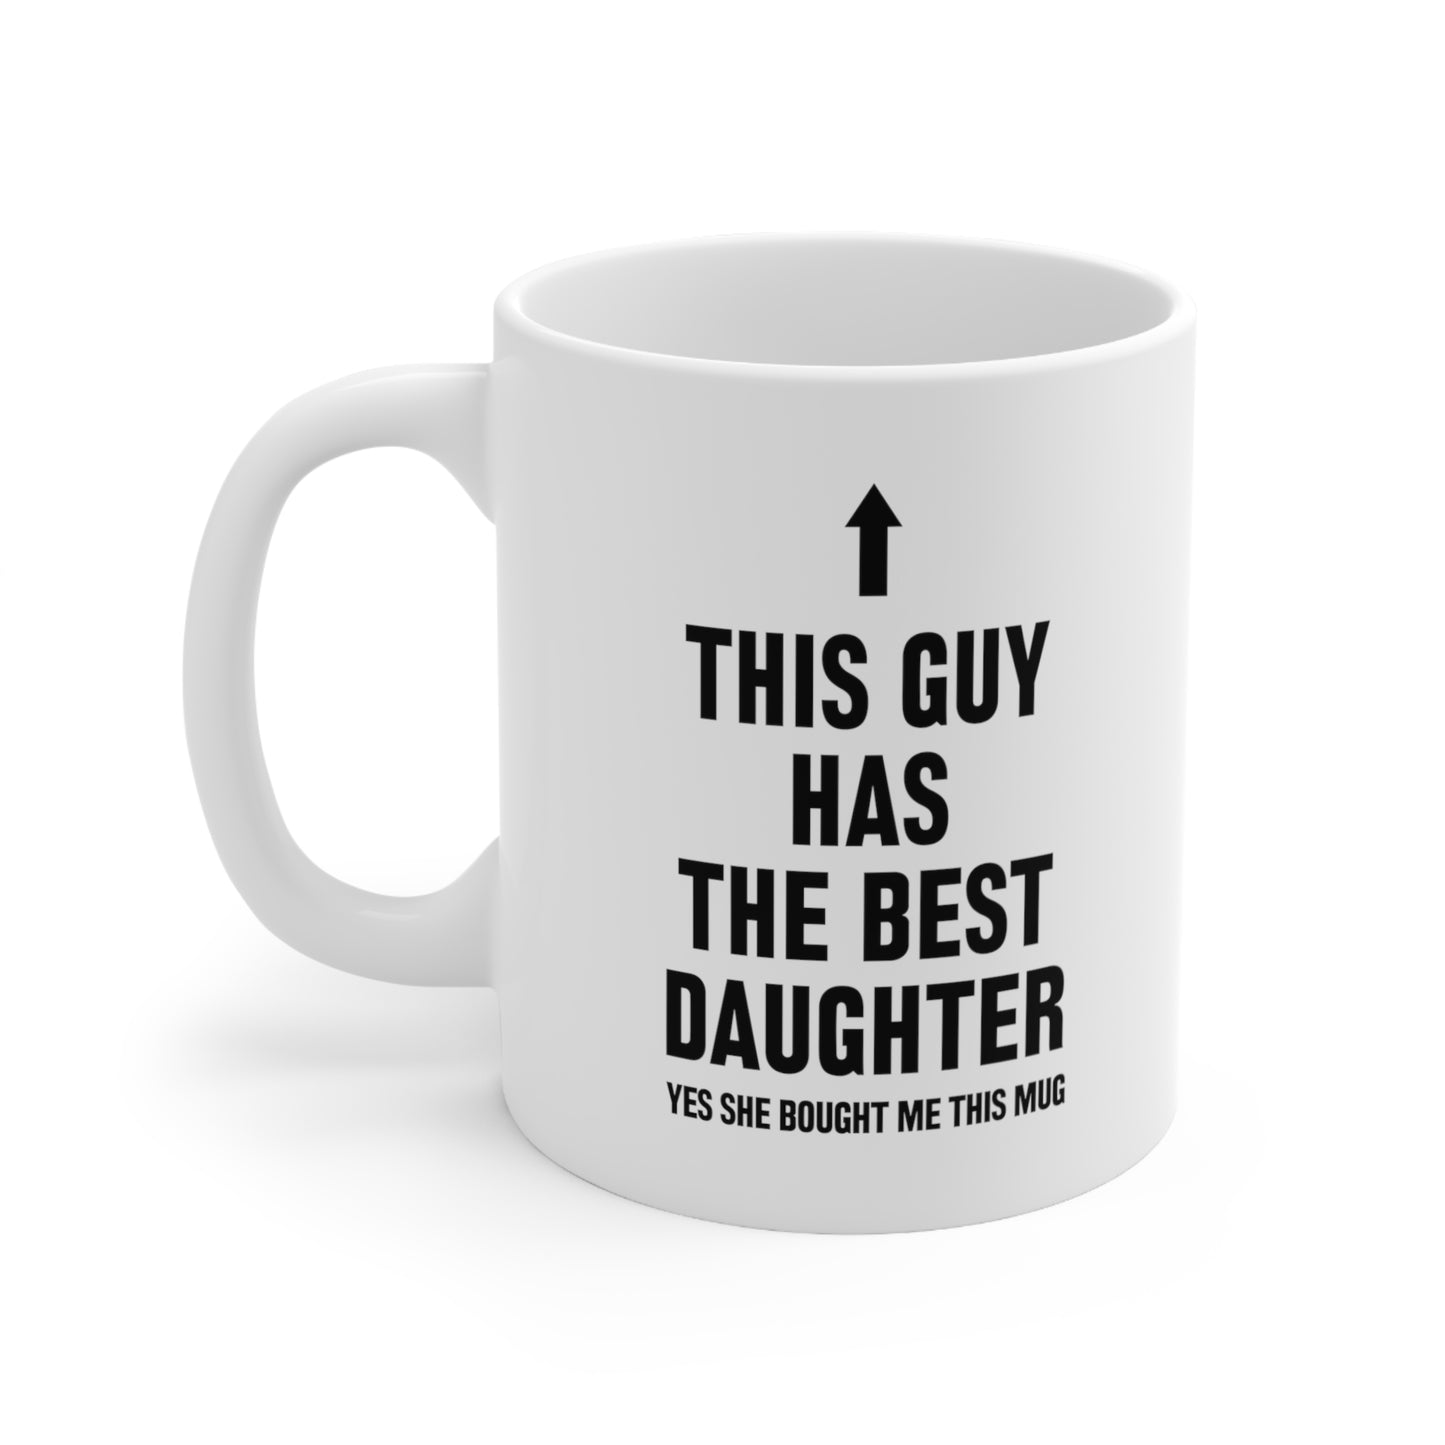 This Guy Has The Best Daughter Yes She Bought Me This Mug